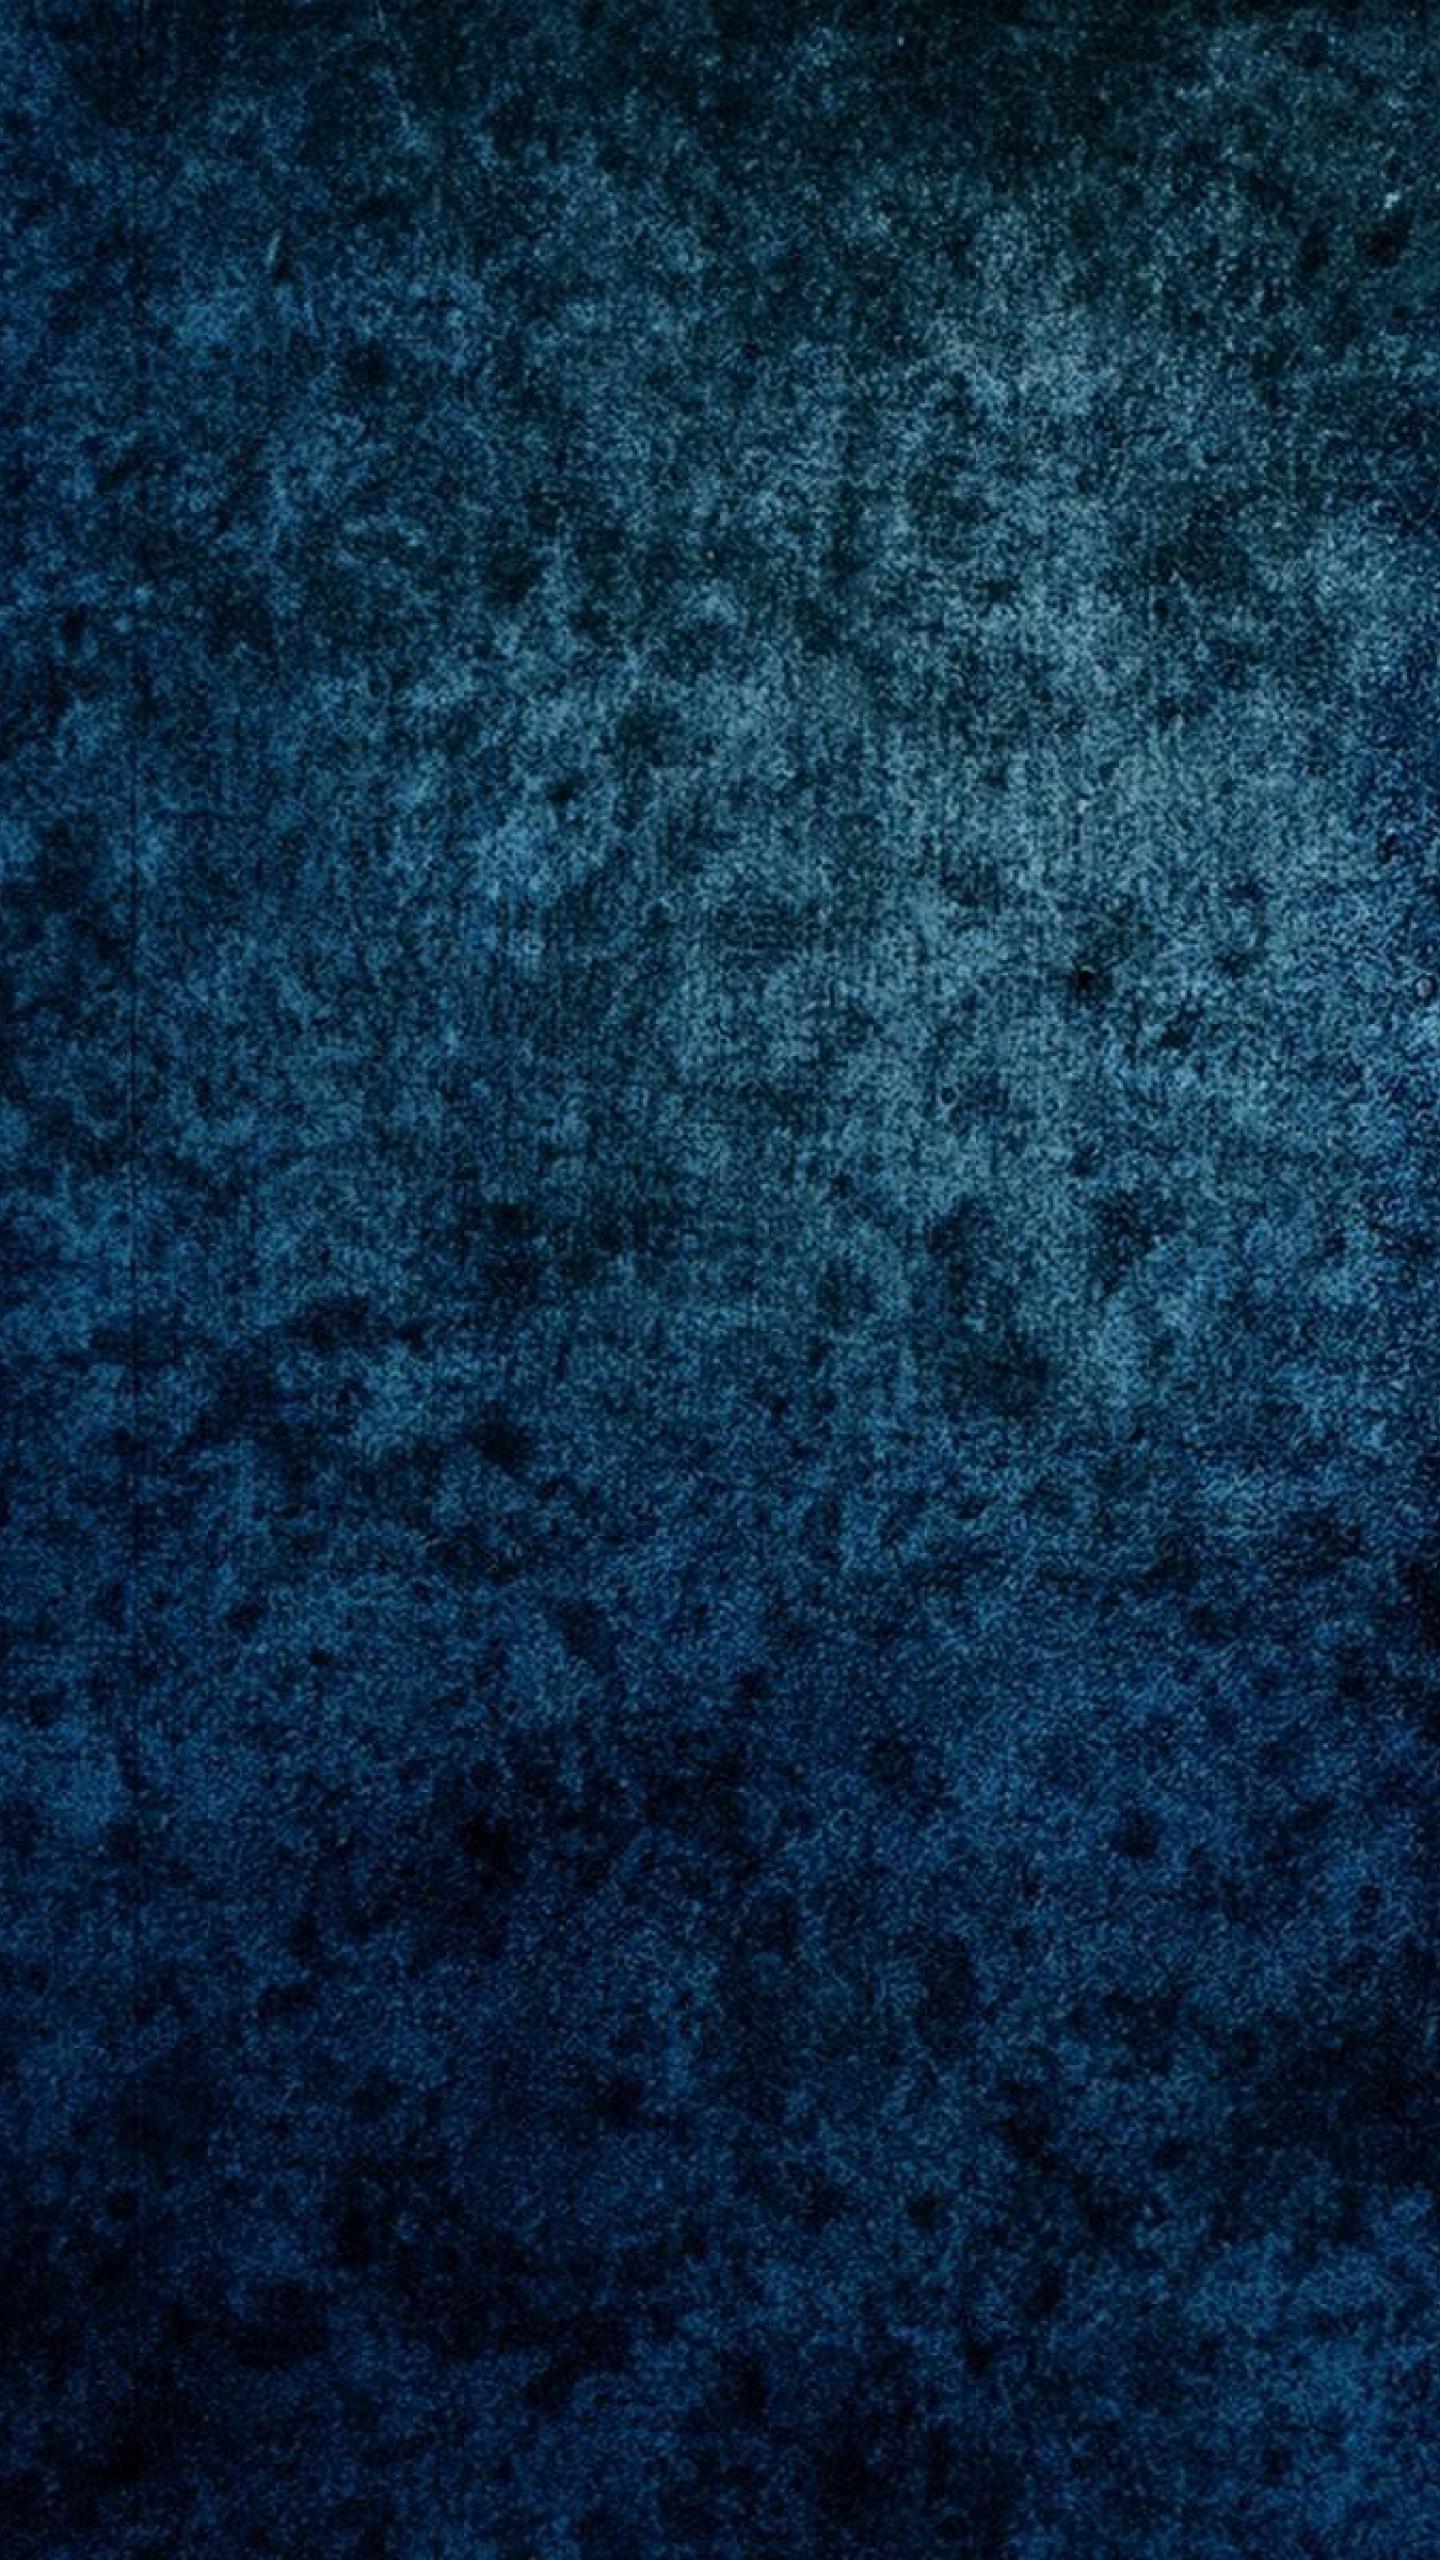 10+ Abstract Wallpaper Hd For Mobile